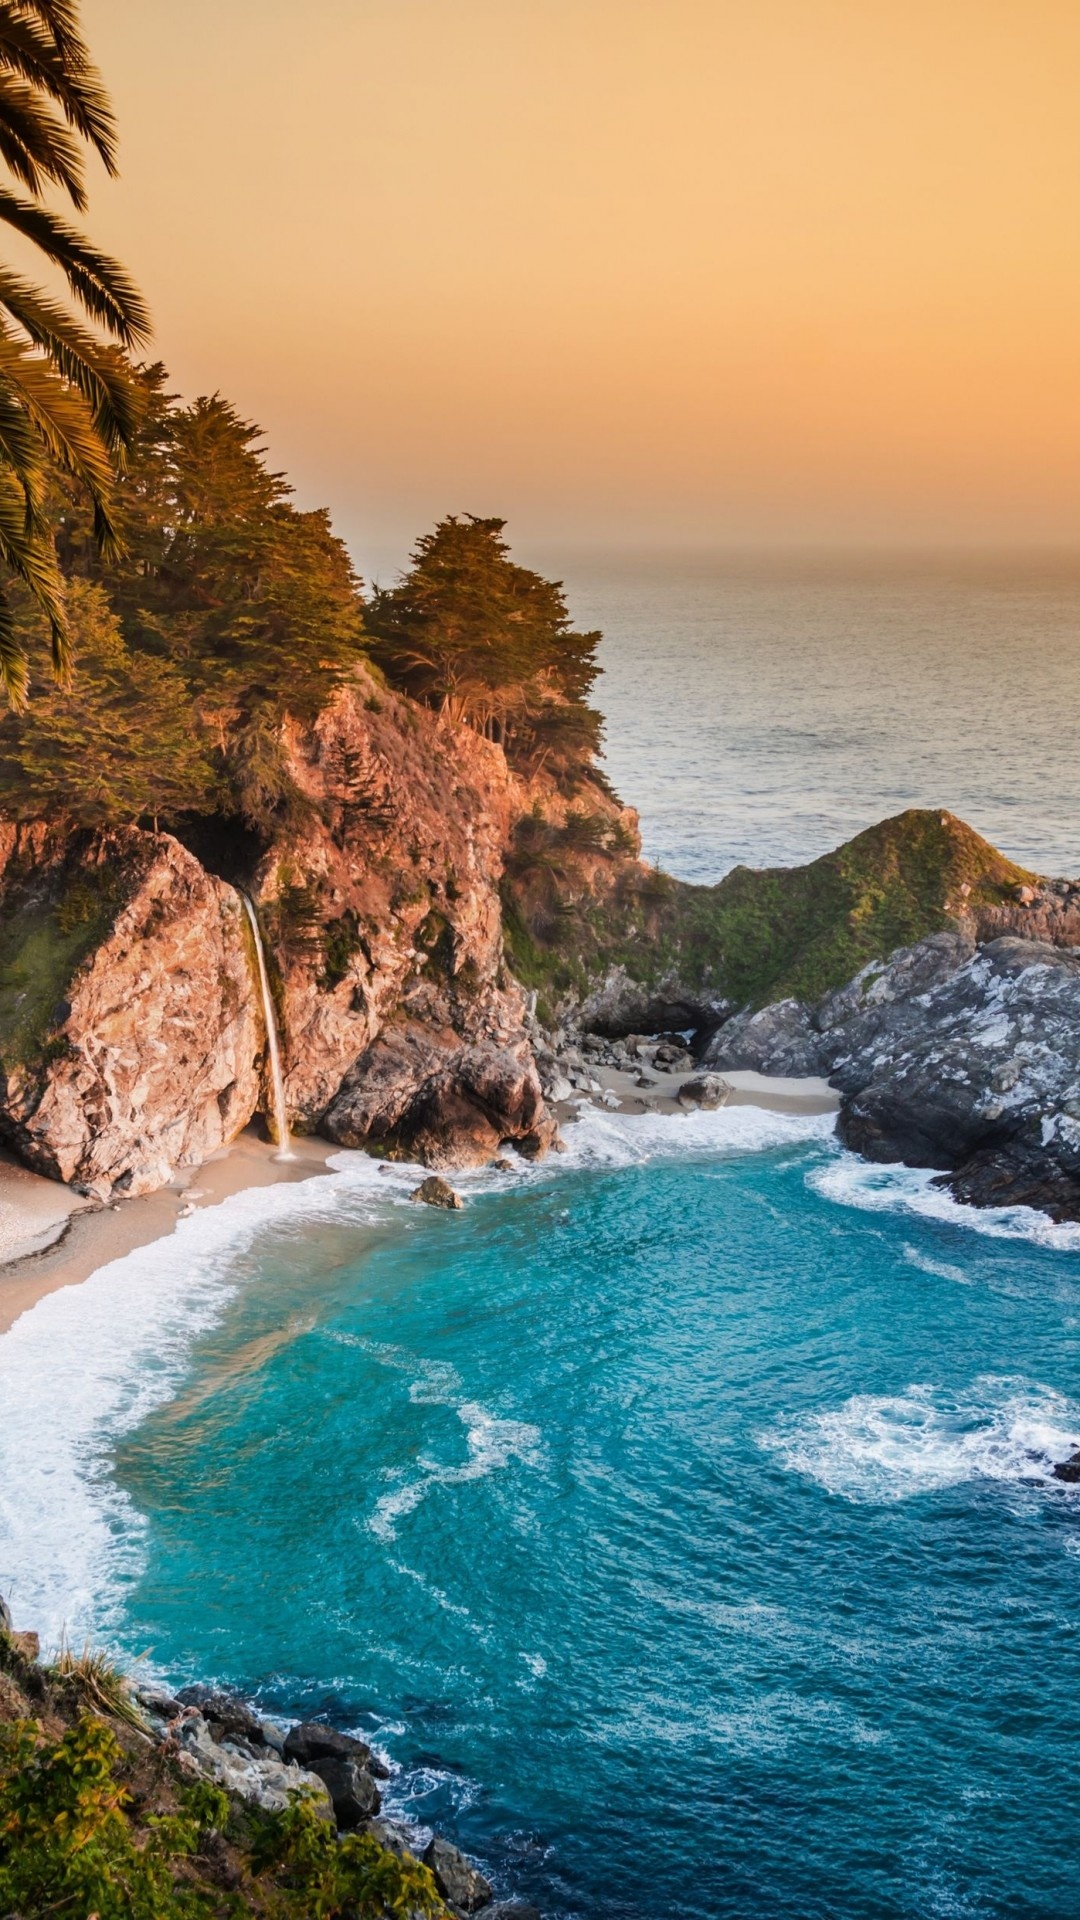 Pacific Ocean wallpaper, Big Sur's 5k charm, McWay Falls sunset, Nature's breathtaking spectacle, 1080x1920 Full HD Phone